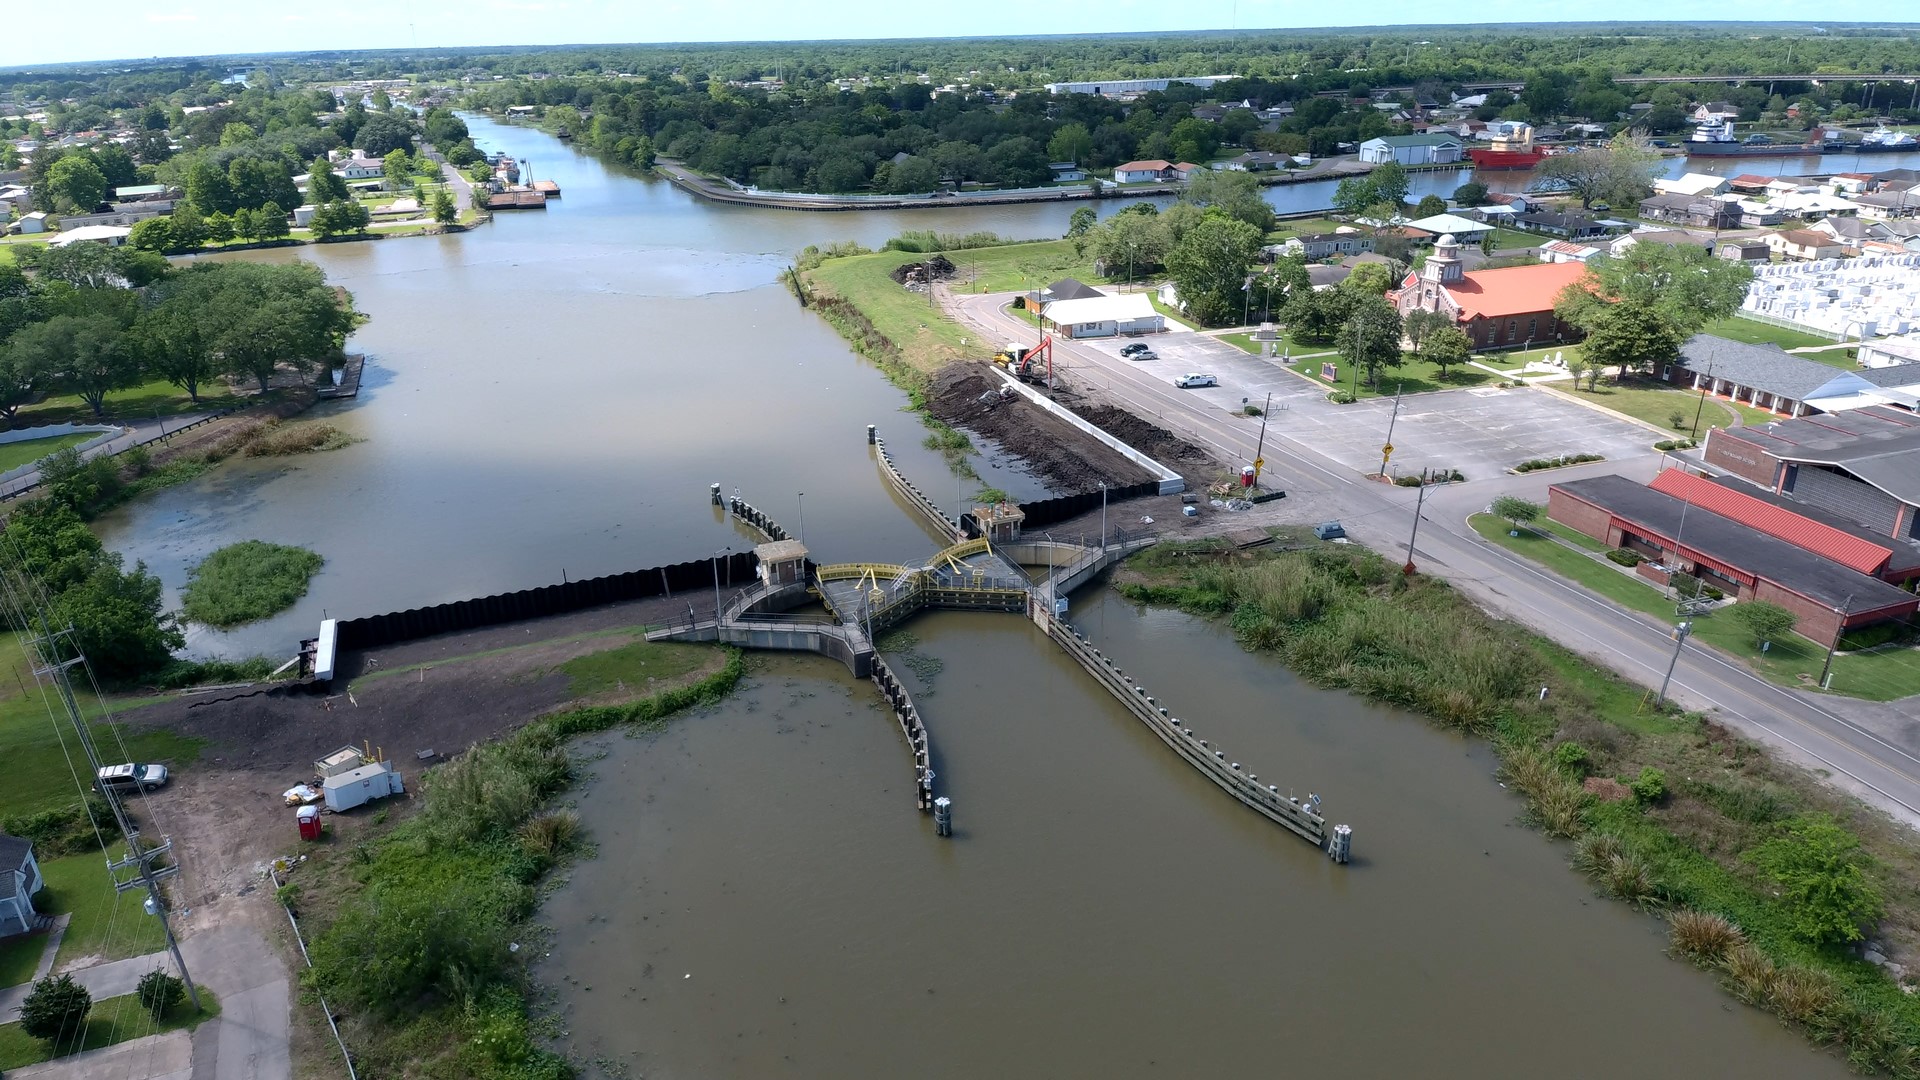 South Lafourche Prepares For Cristobal Bridges And Floodgates Have Closed The Times Of Houma Thibodaux